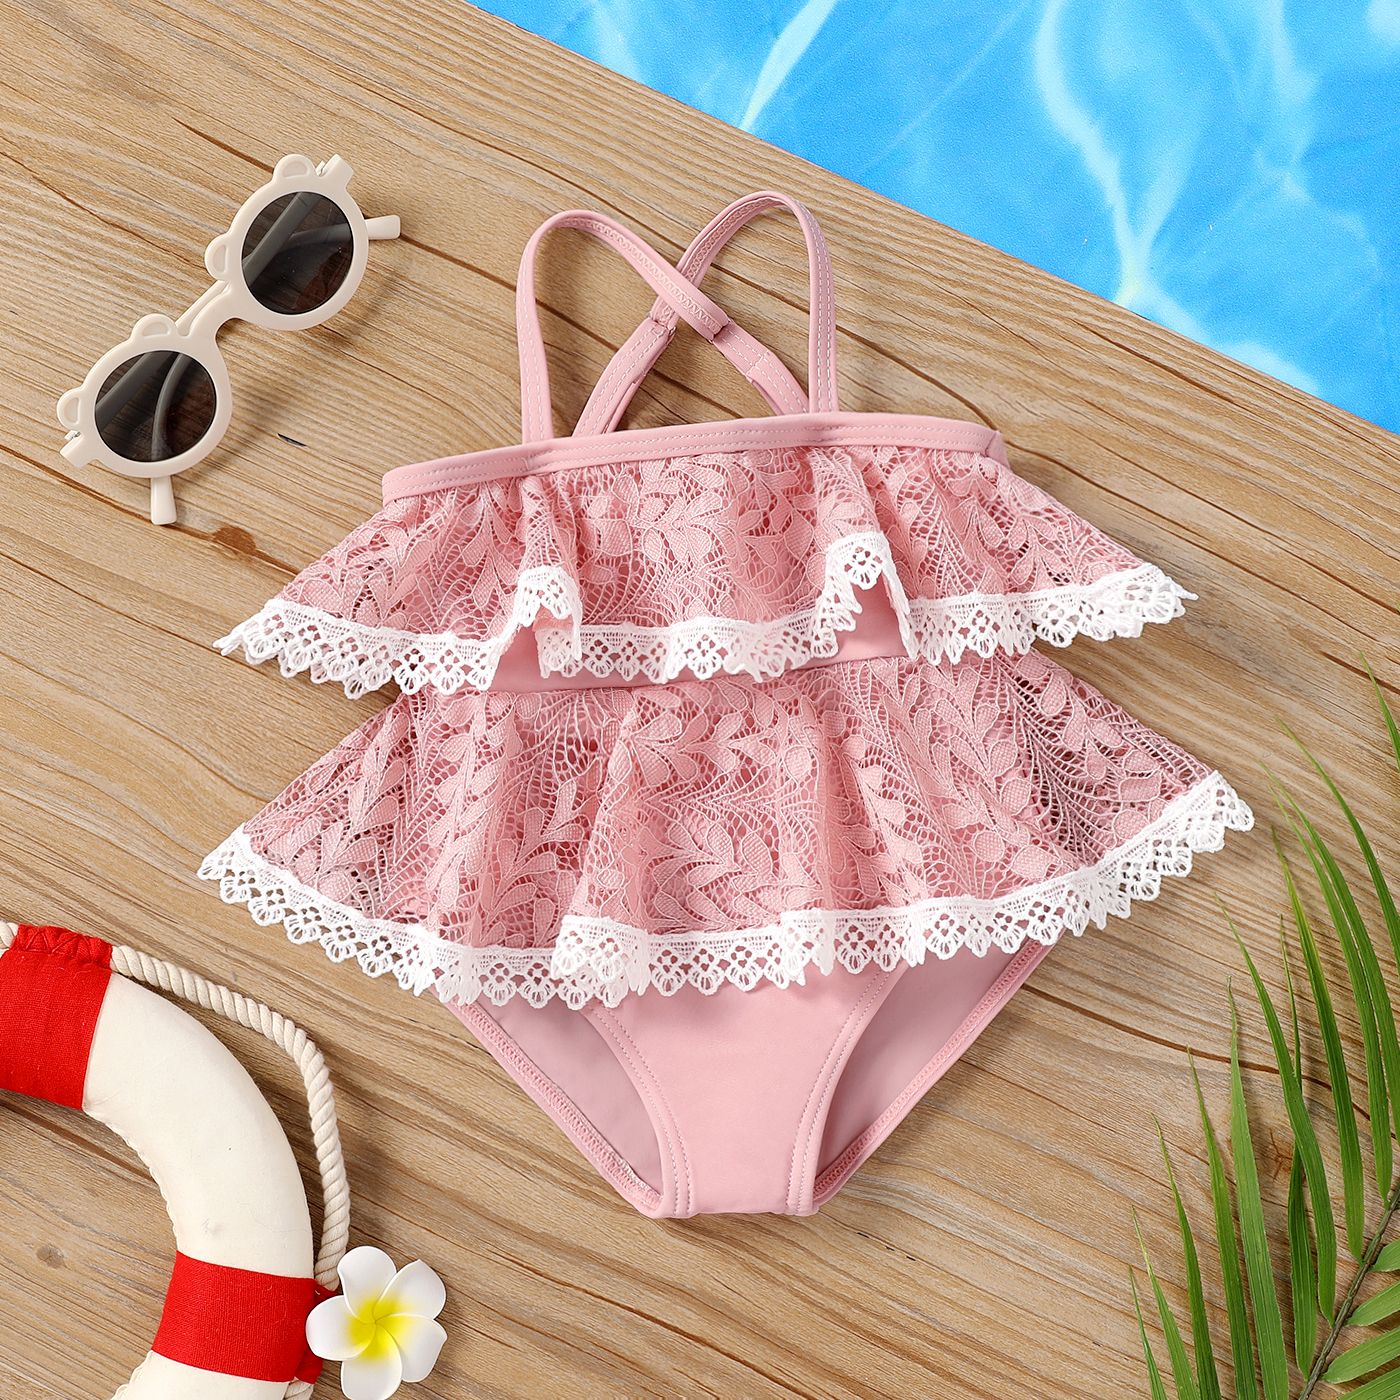 

Baby Girl Ruffled Lace Layered One Piece Swimsuit